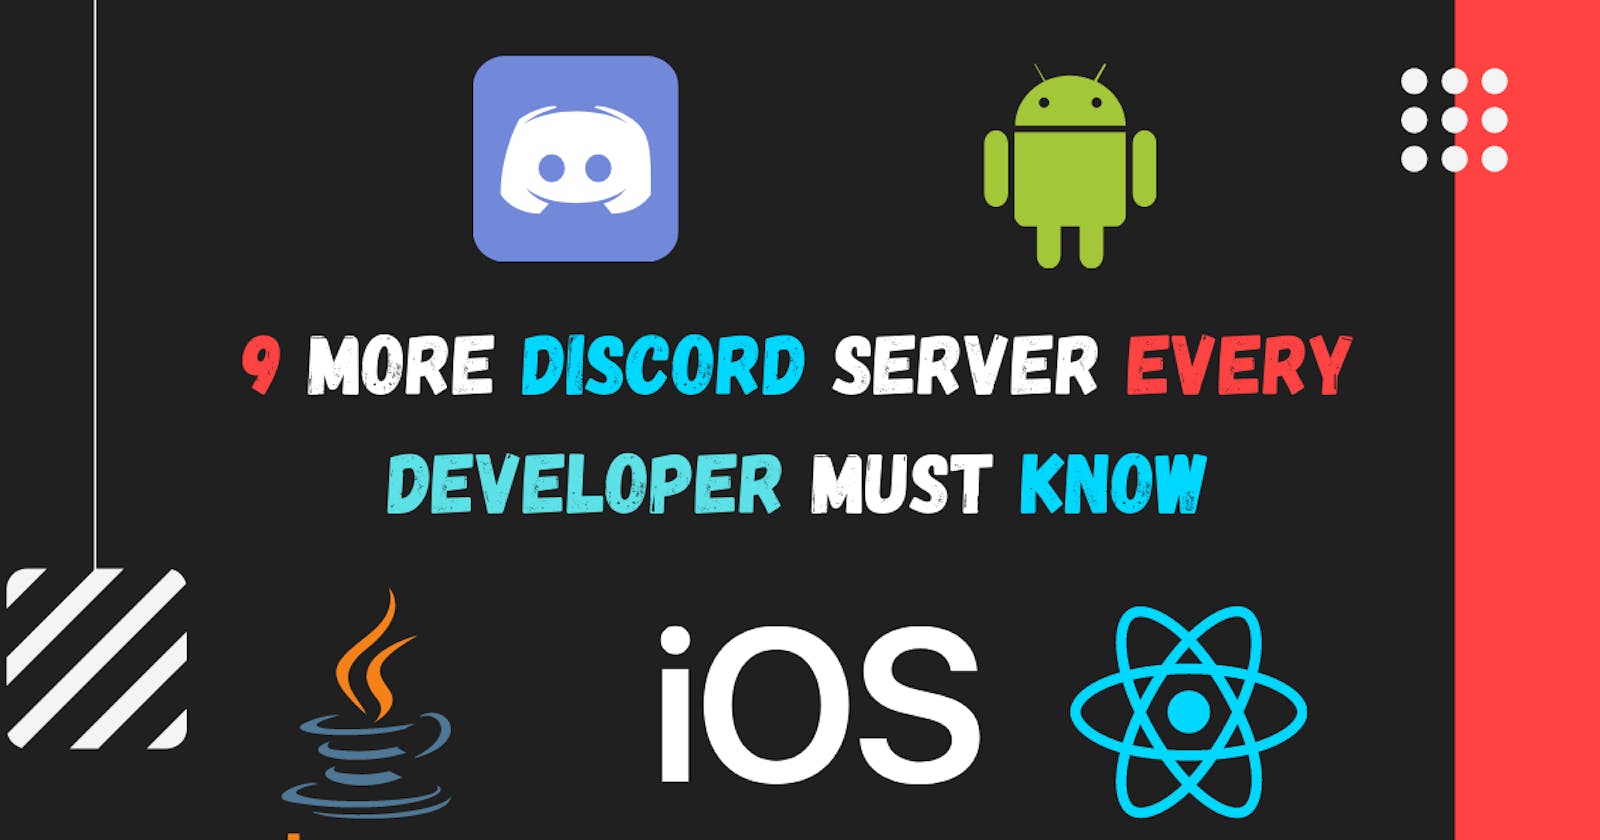 9 more Discord server every developer must know!